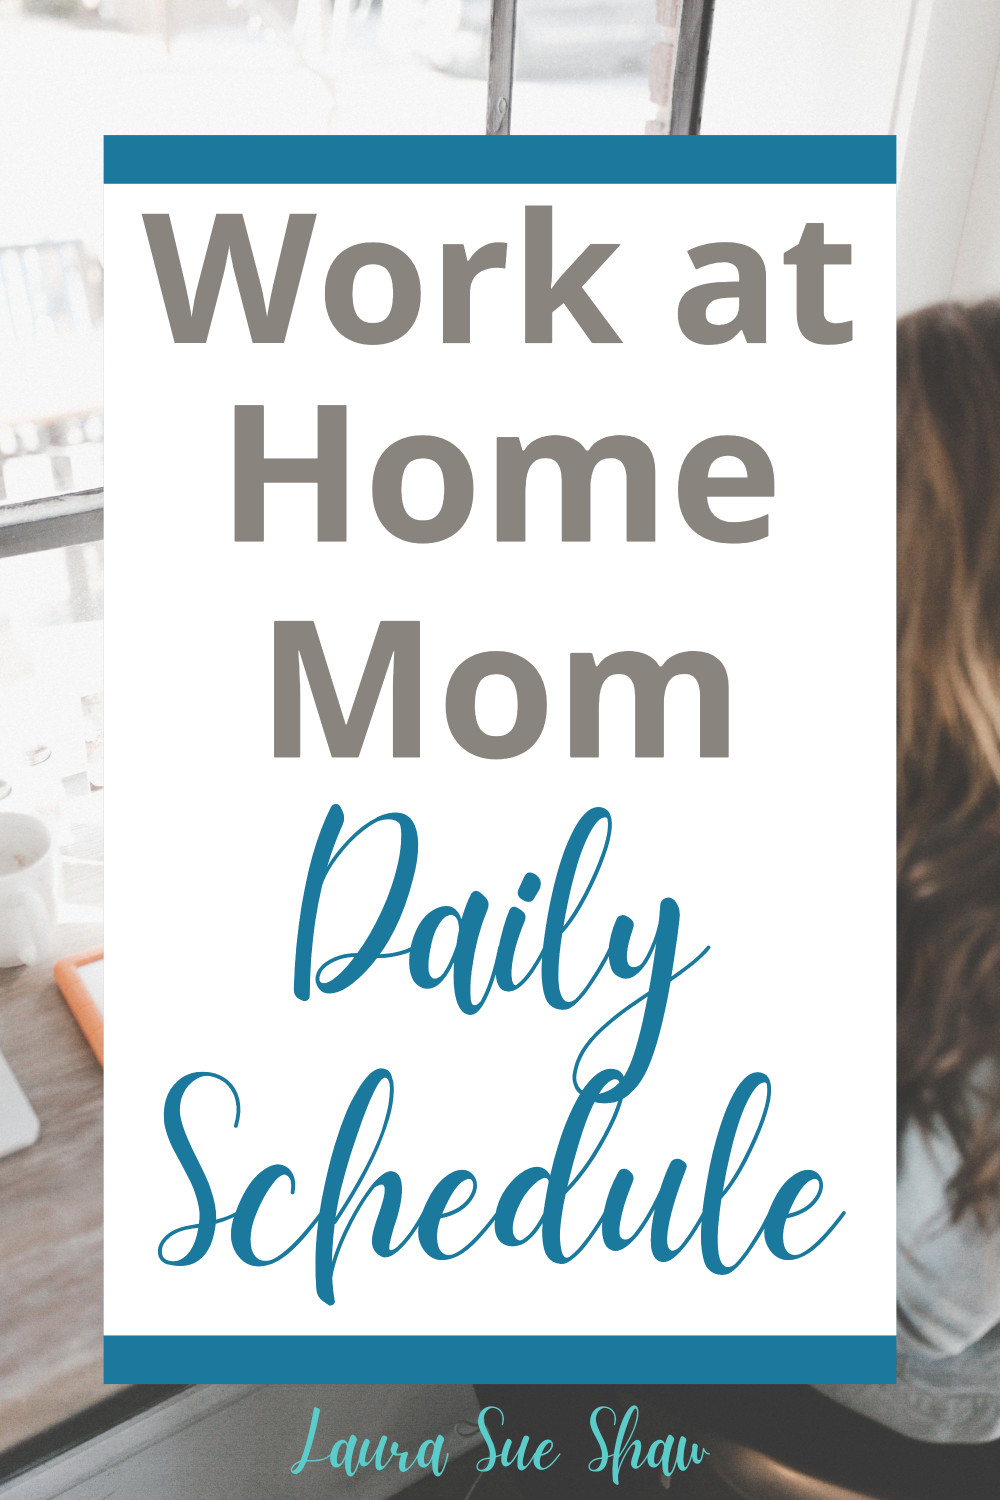 Take a behind-the scenes look at my work from home mom daily schedule as I juggle parenting, housework, and running a business.